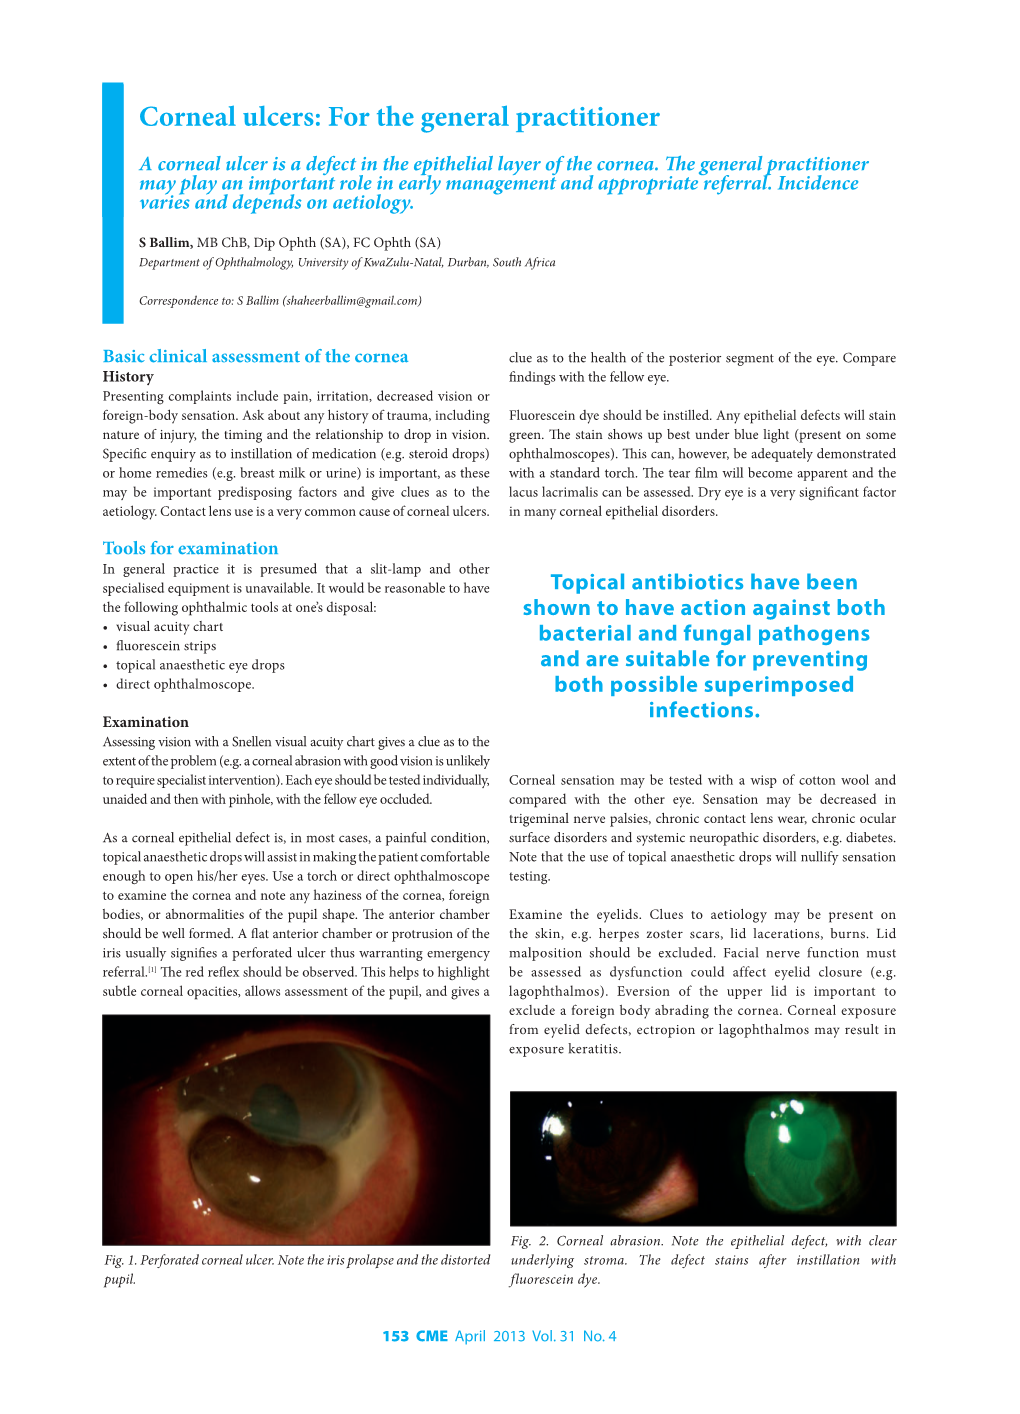 Corneal Ulcers: for the General Practitioner